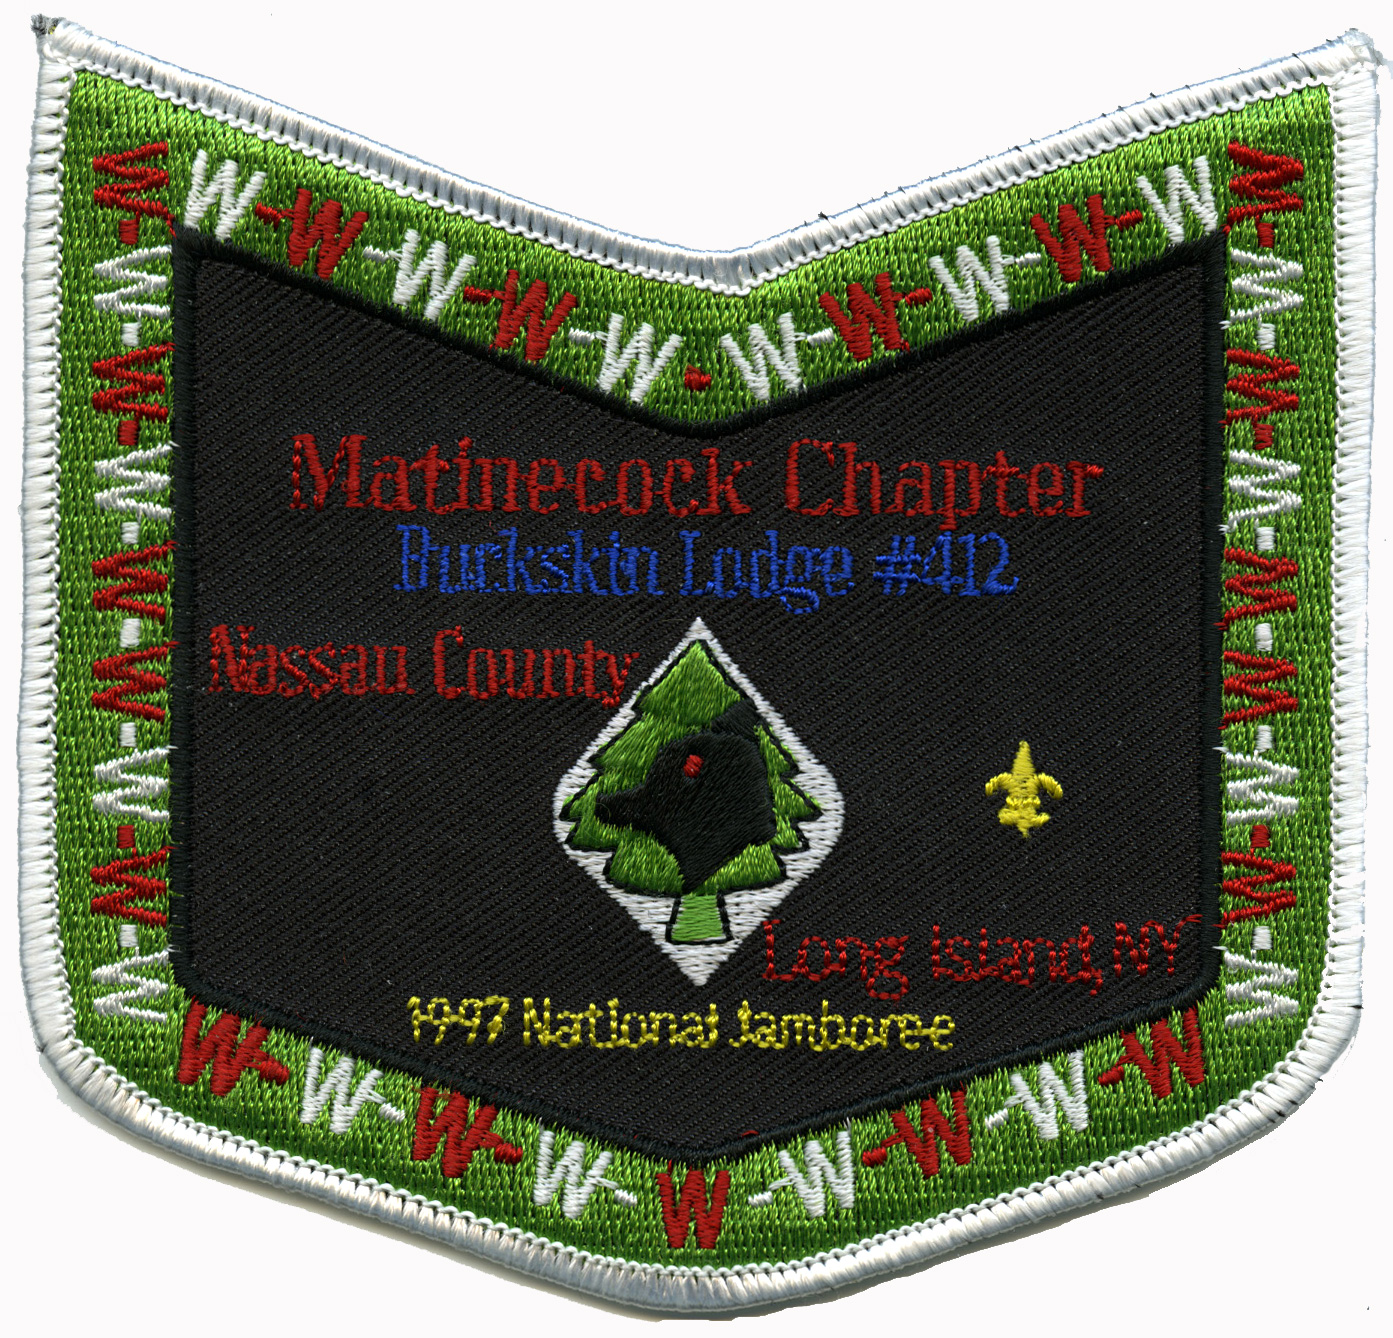 Matinecock Chapter from 1997 NOAC